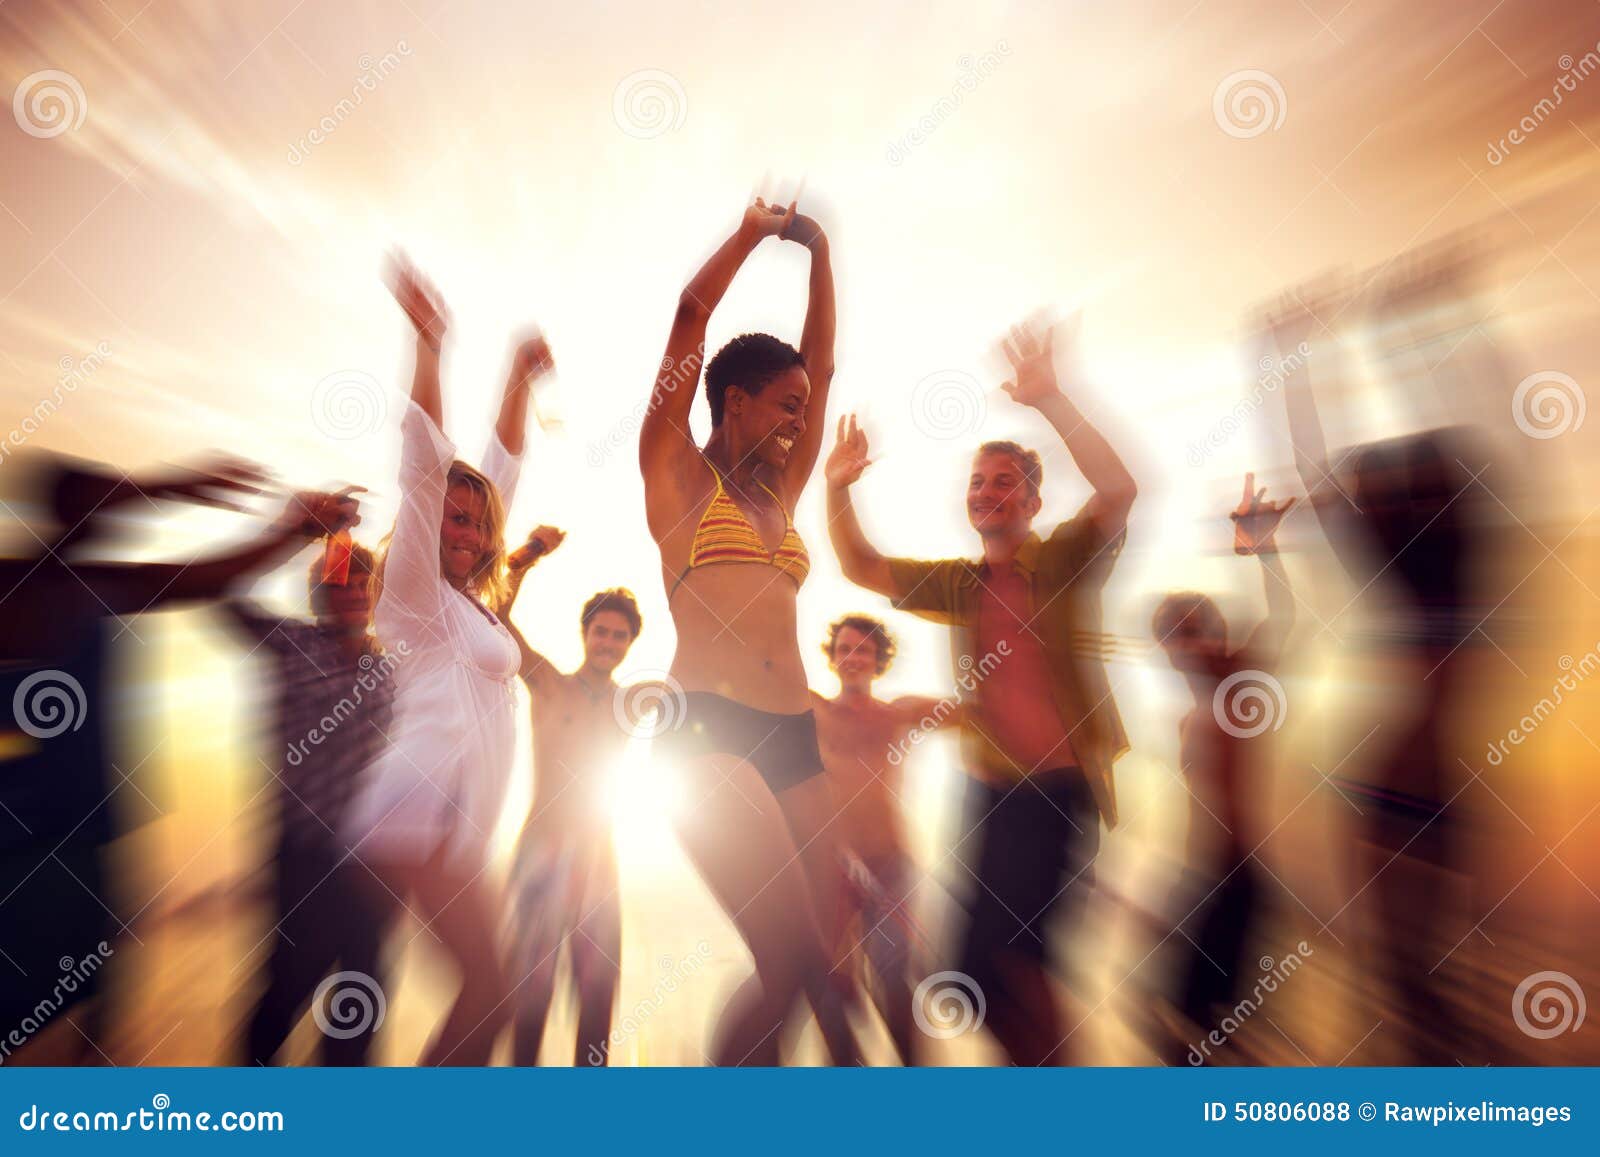 dancing party enjoyment happiness celebration outdoor concept